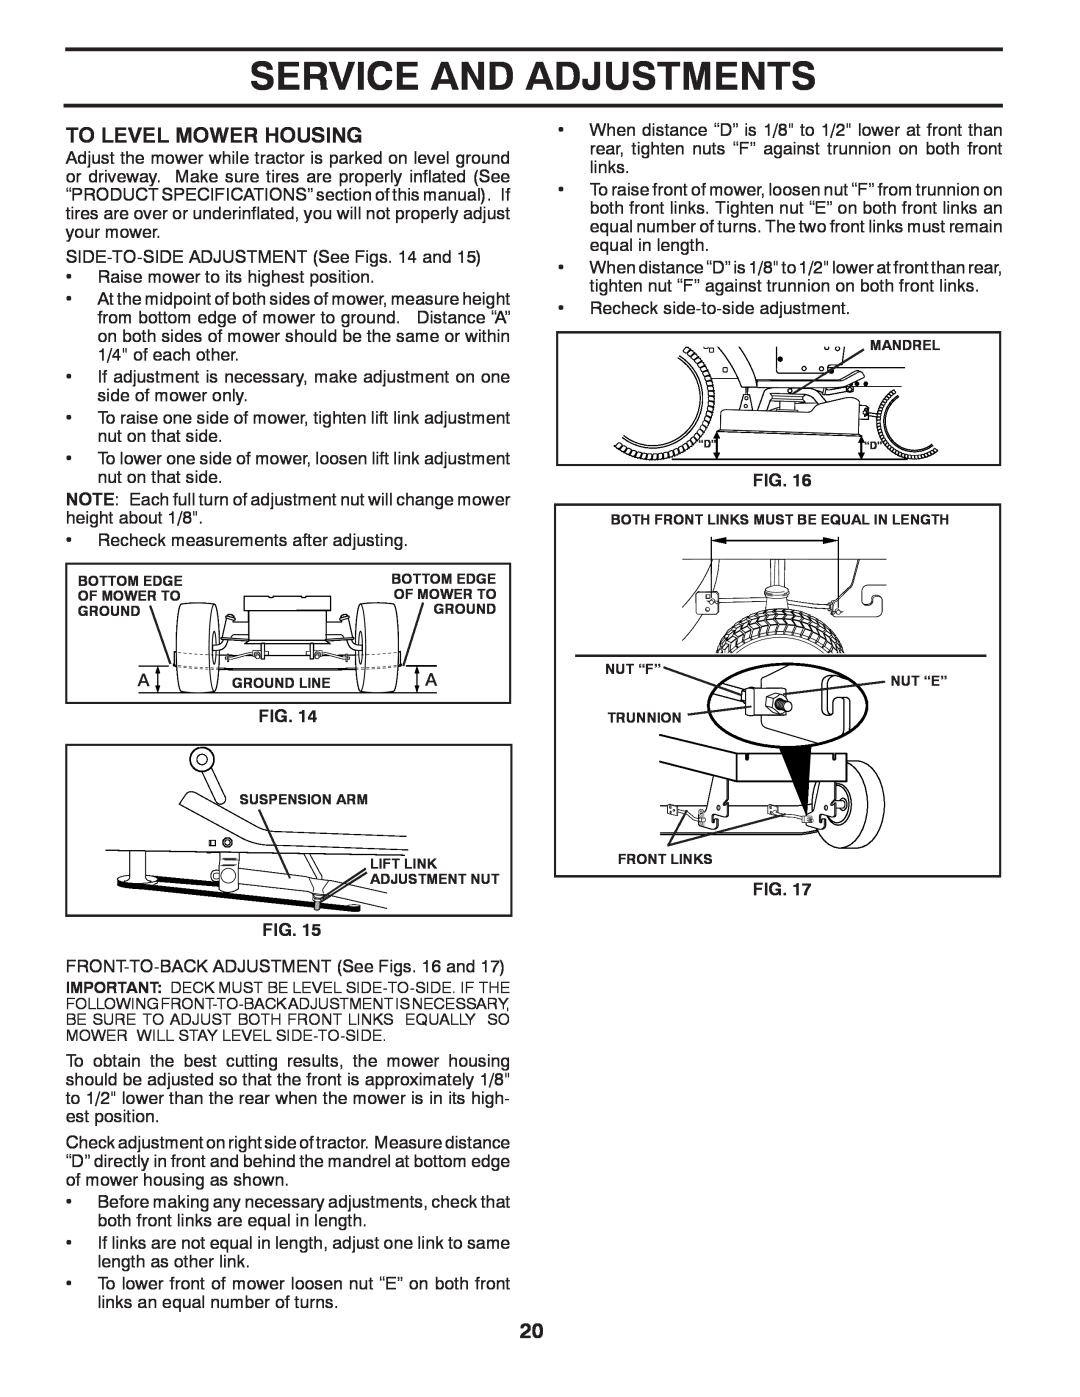 Poulan 96012006904 manual To Level Mower Housing, Service And Adjustments 